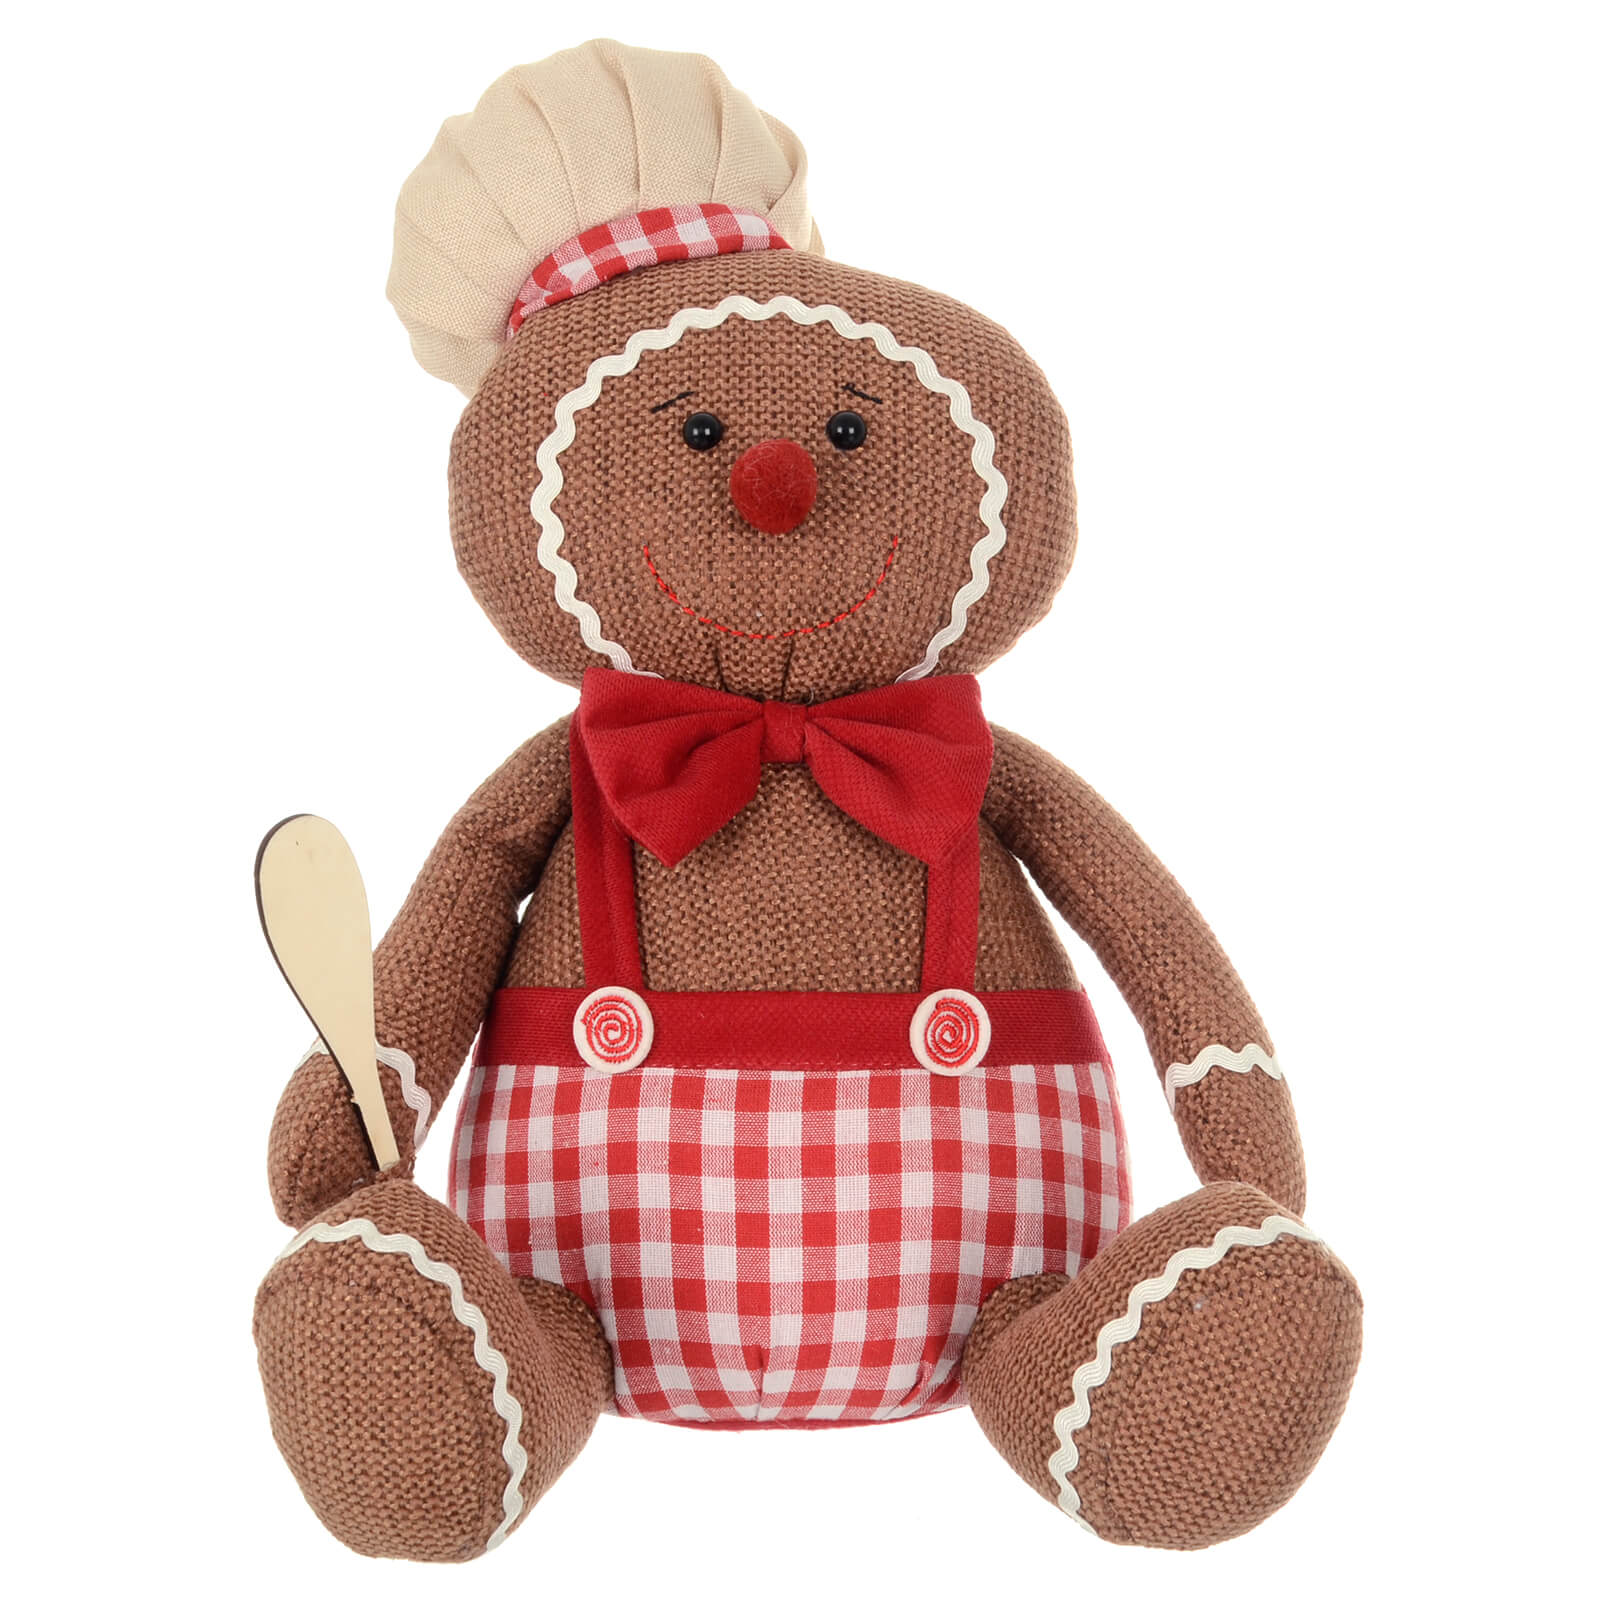 Gingerbread man 33cm figure with spoon